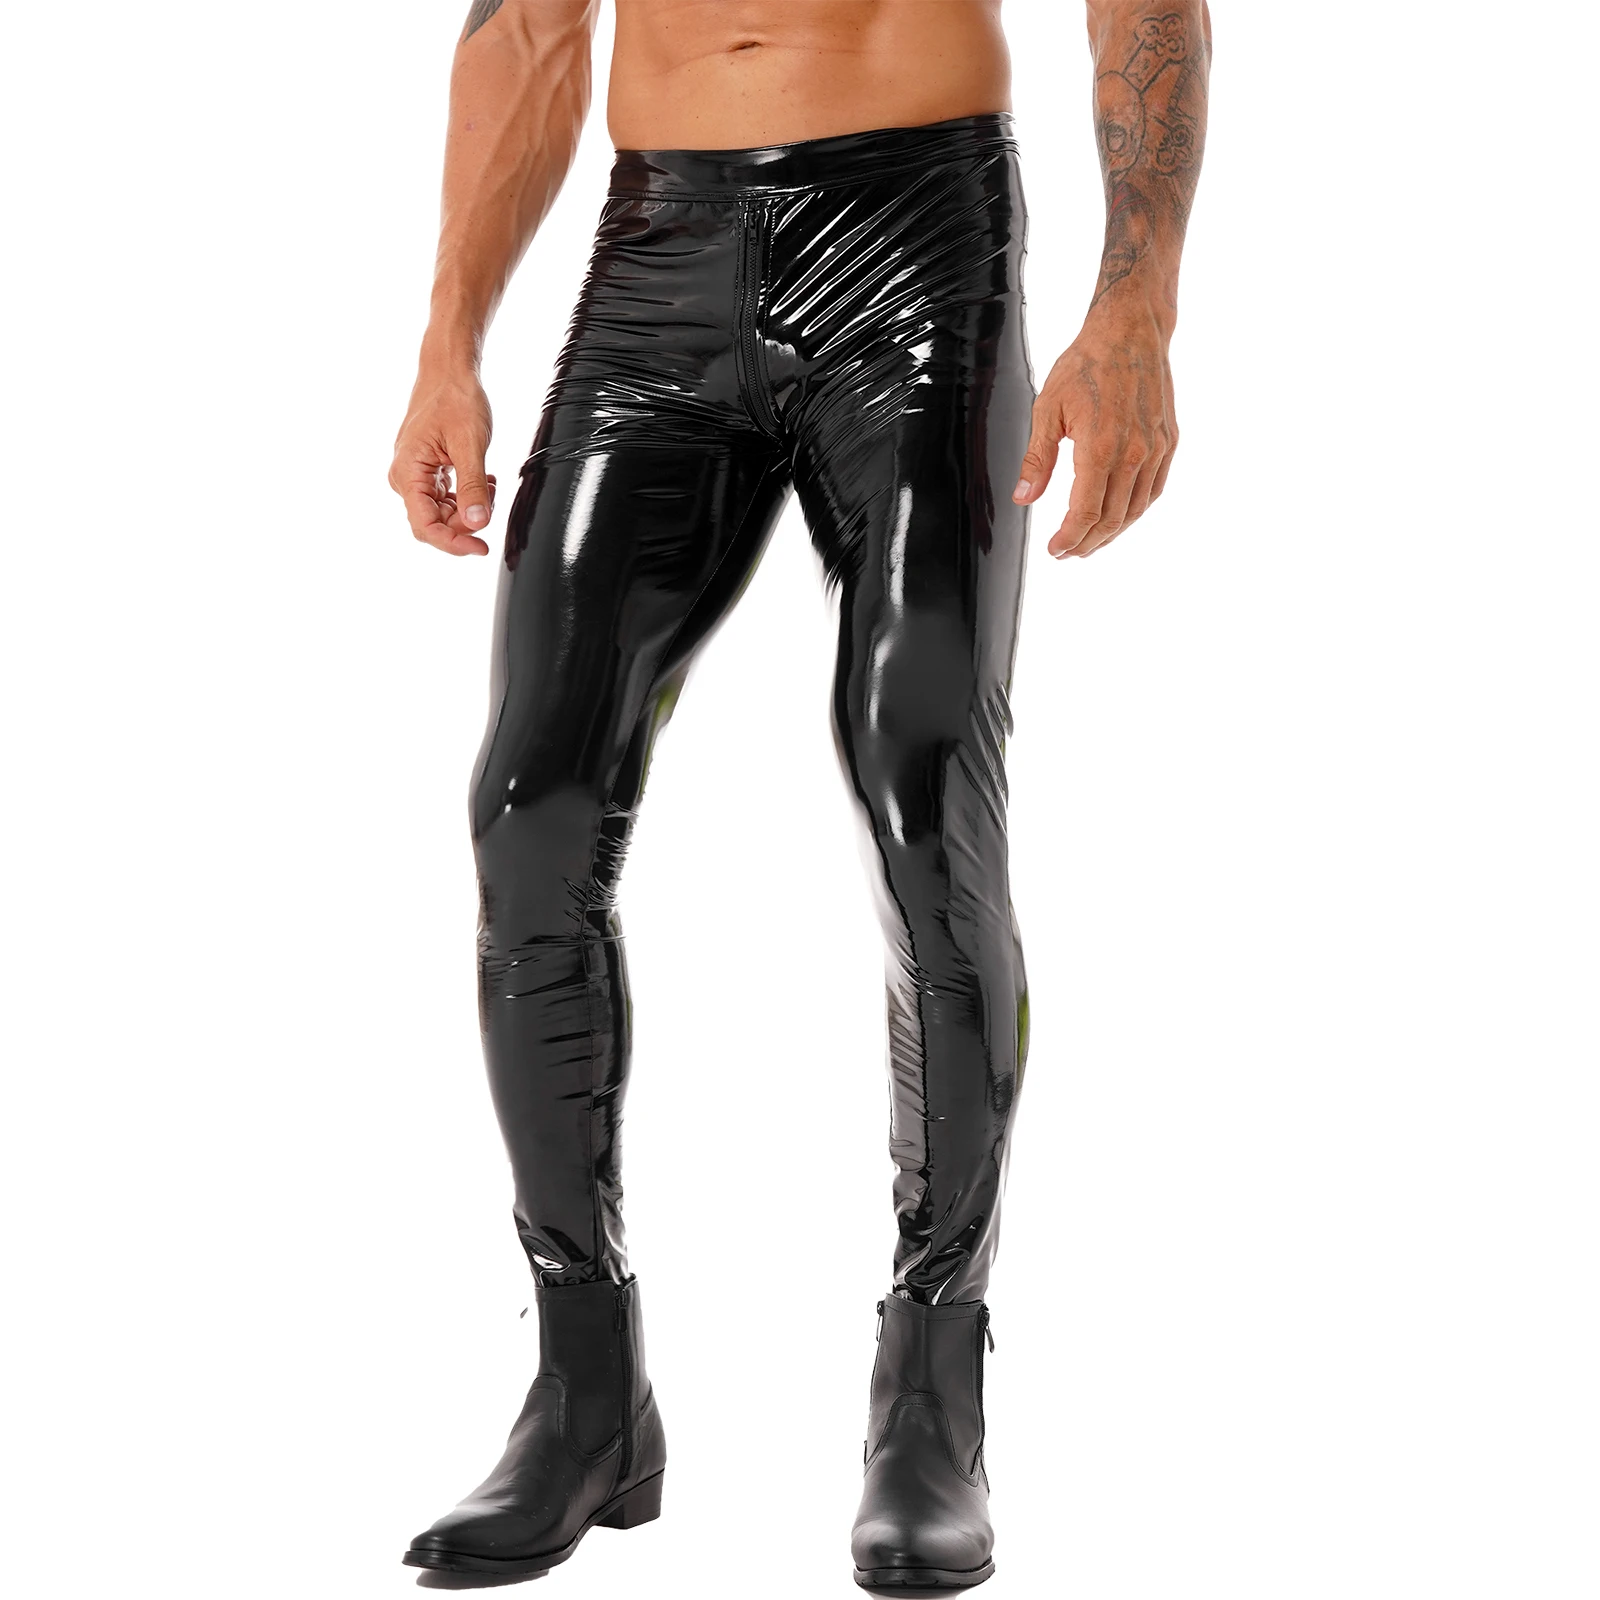 Mens Male Leggings Motorcycling Party Tights Pants Patent Leather Motobiker Skinny Pants Two-way Zipper Crotch Trousers Clubwear 5